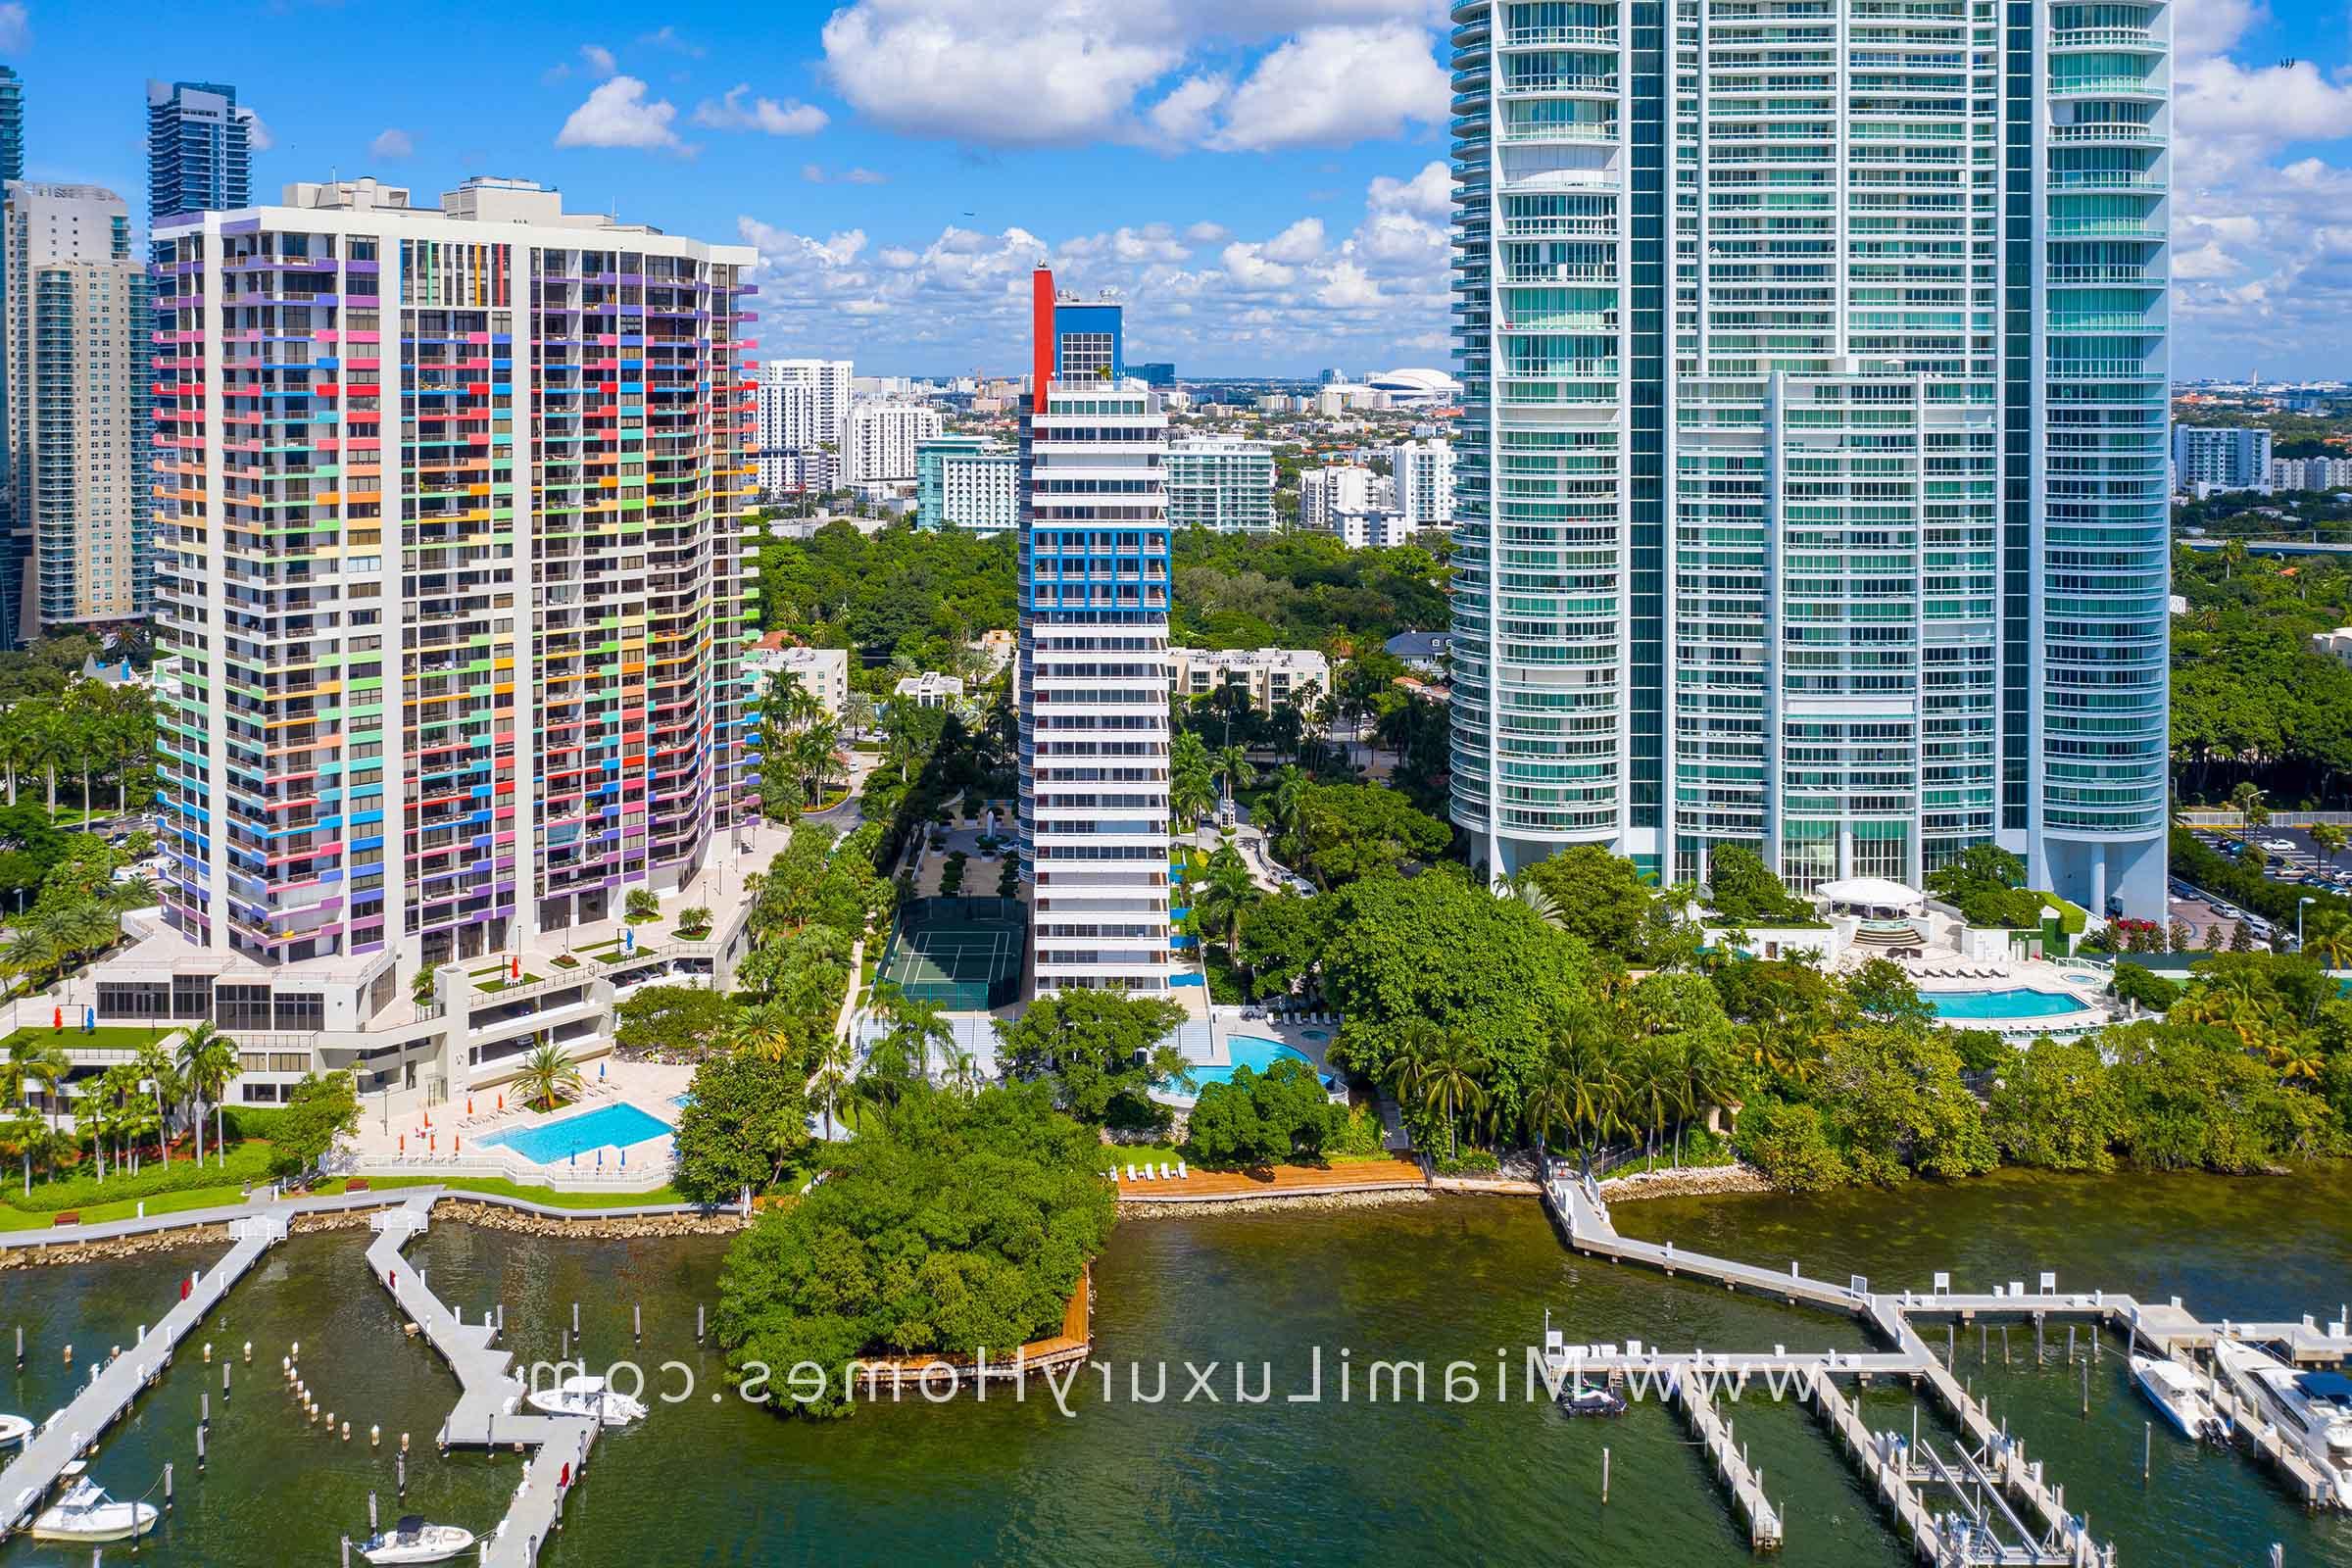 Aerial View of Imperial at Brickell